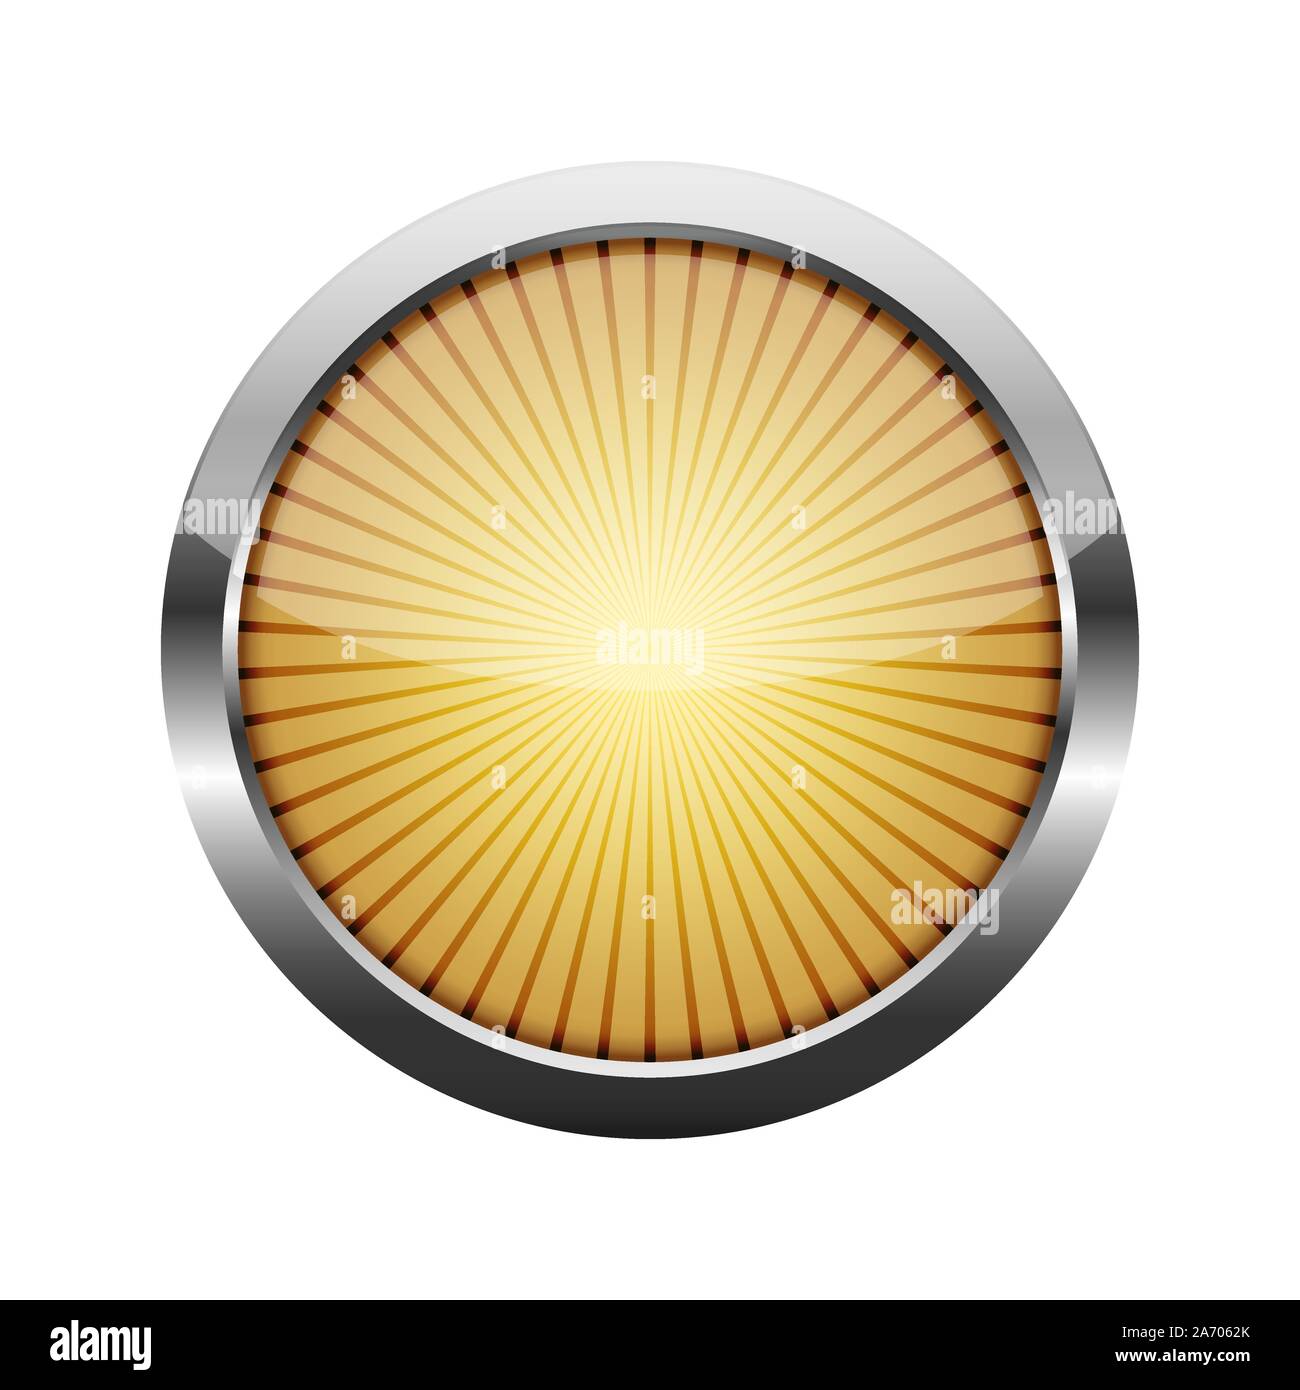 Download Yellow Round Button With A Metal Frame Vector Illustration Round Button With Rays Inside Isolated On White Background Stock Vector Image Art Alamy Yellowimages Mockups